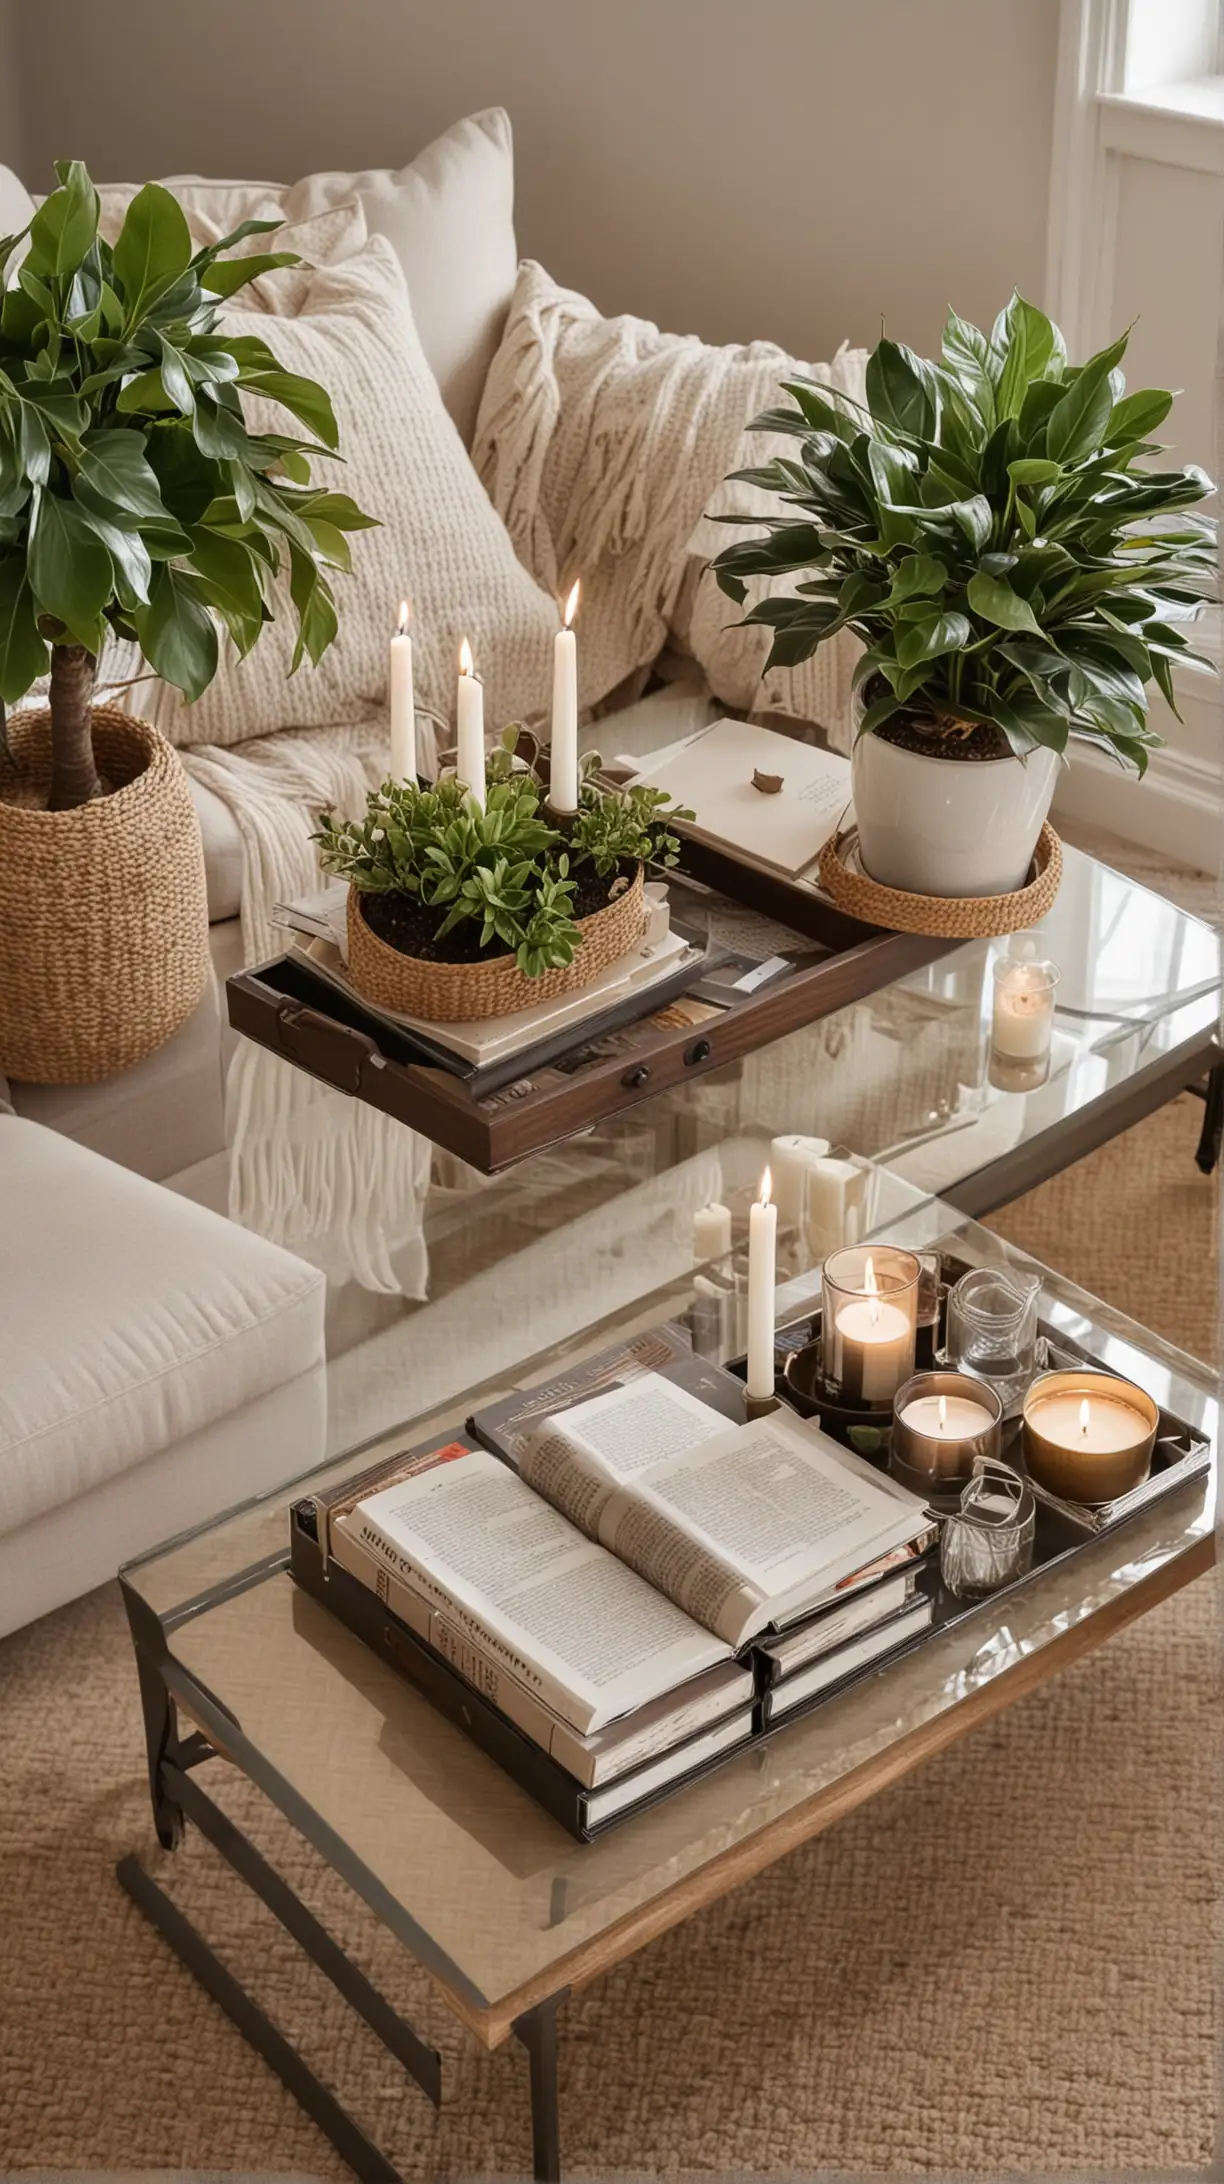 A stylishly arranged coffee table in a living room, featuring books, a small tray with candles, and a decorative plant, serving as a chic focal point.